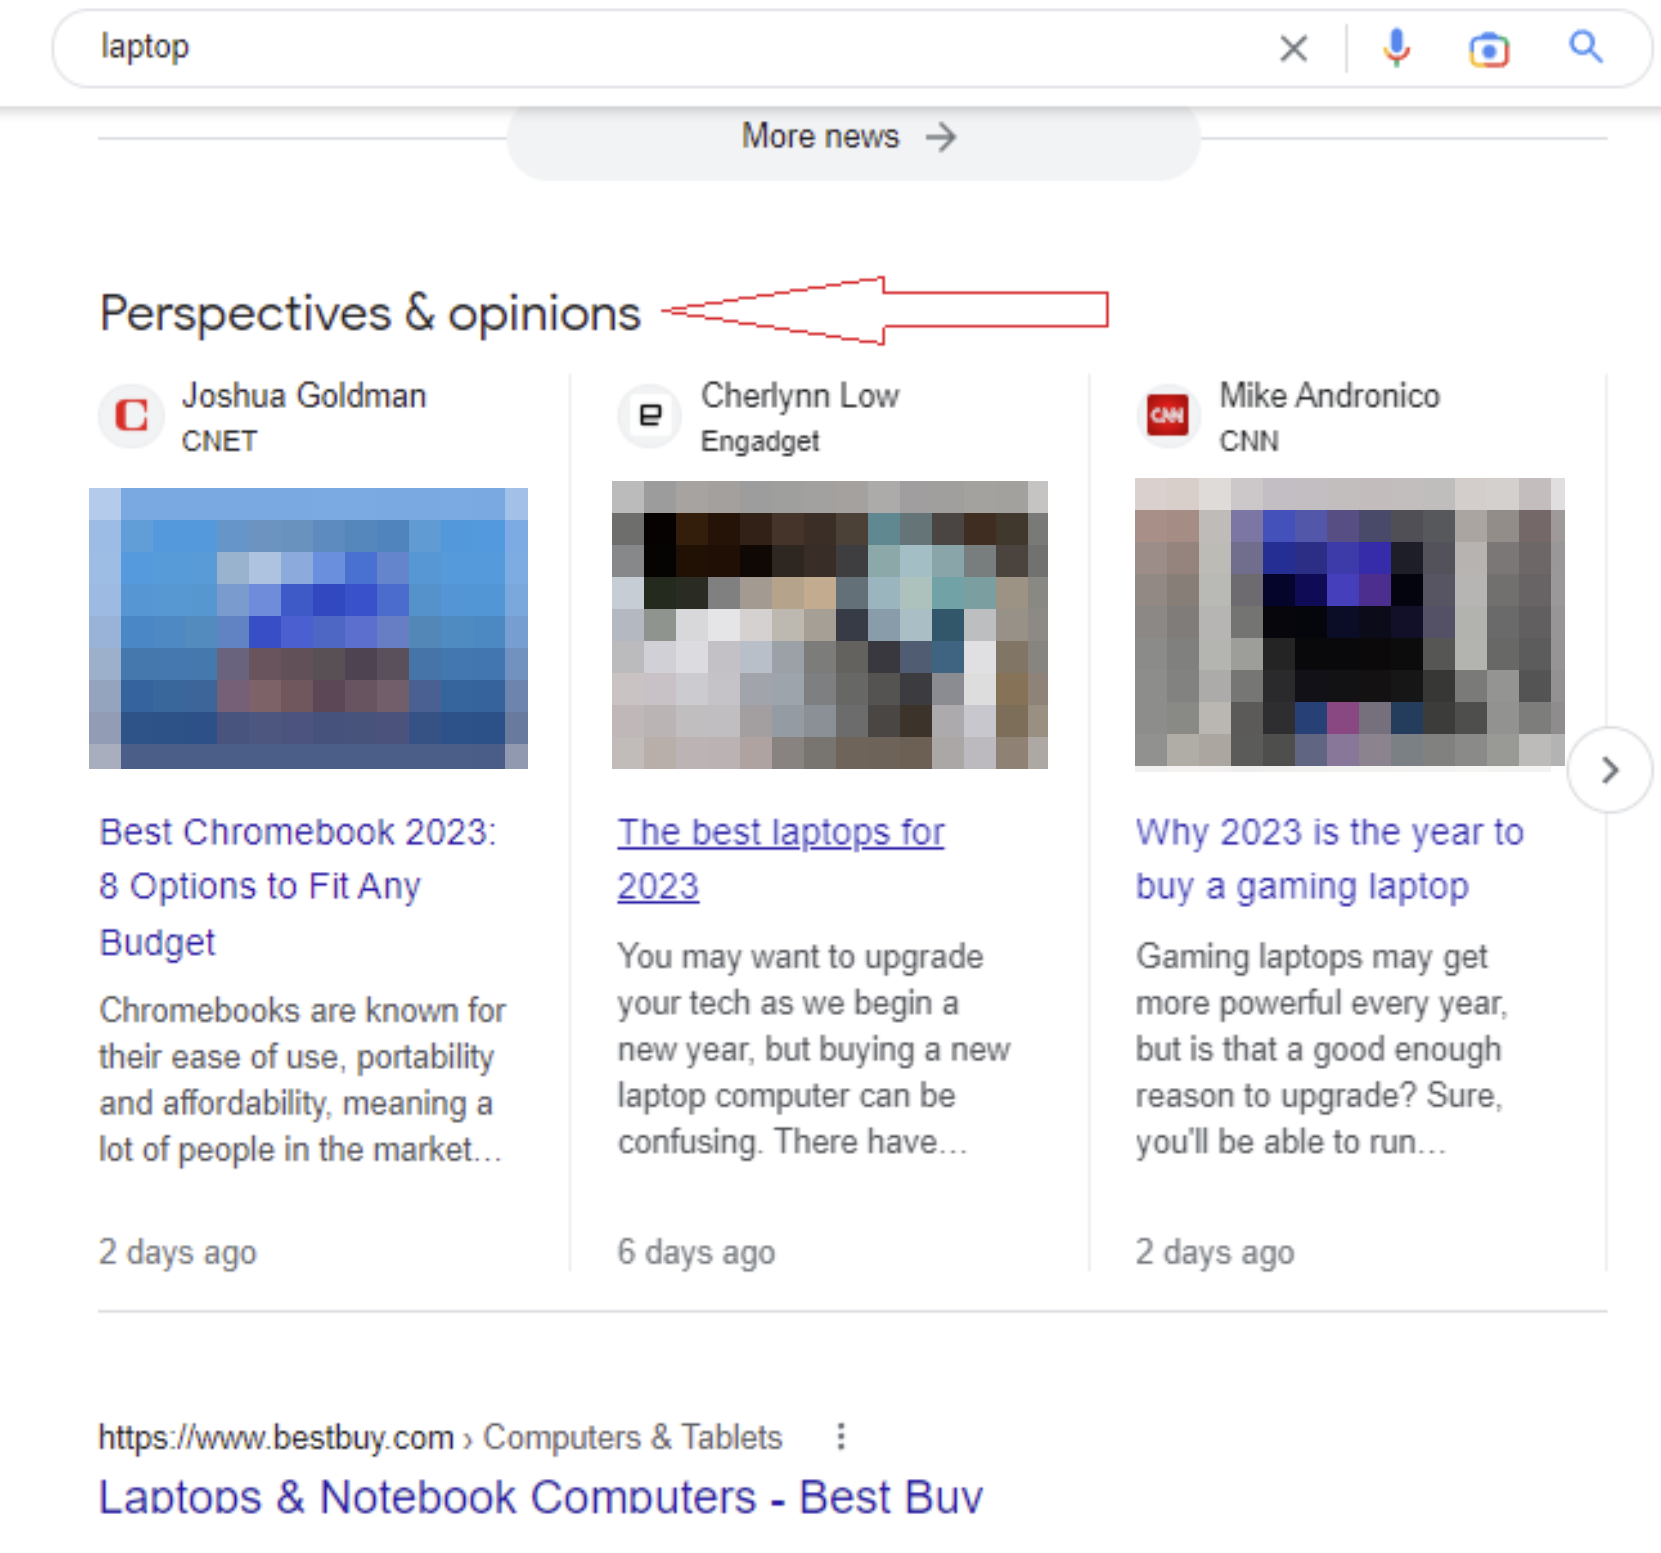 Google Perspectives & Opinions